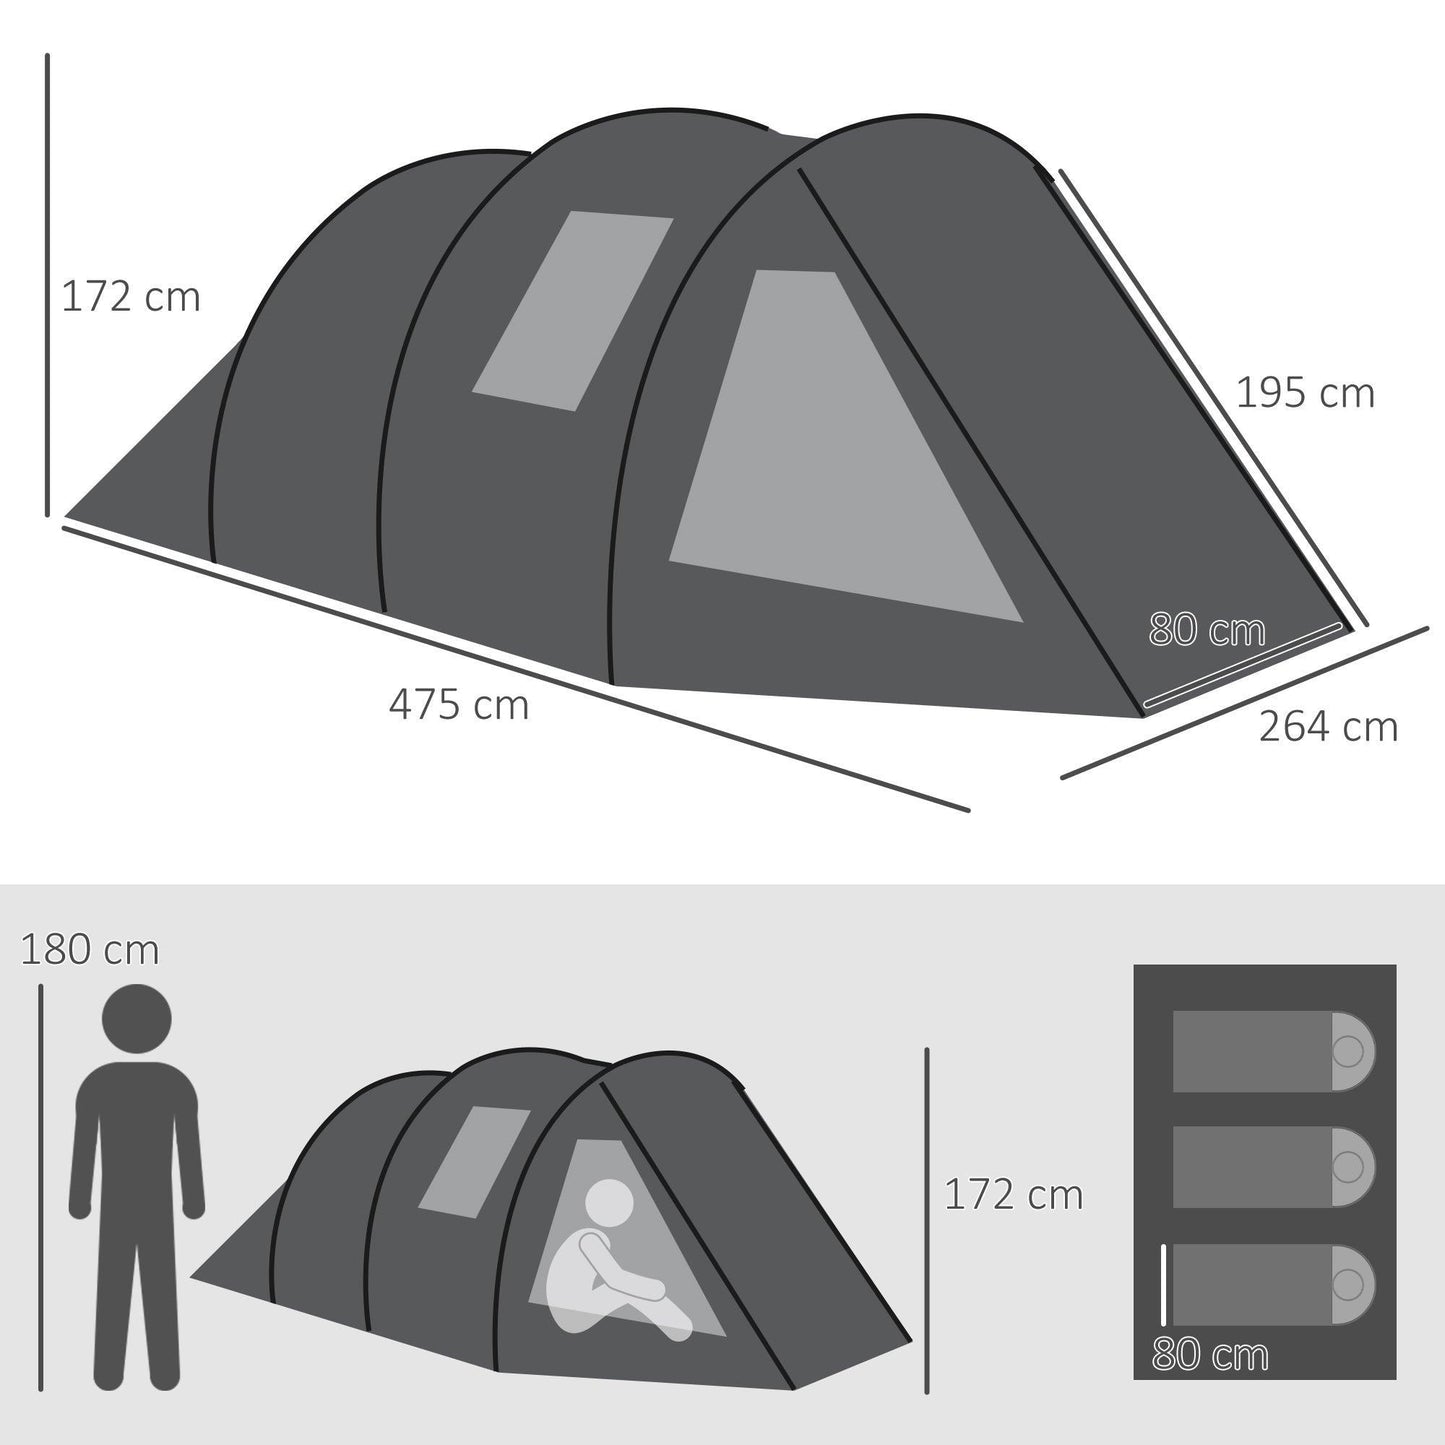 Outsunny Tunnel Tent: Portable 3-4 Person Camping Solution - ALL4U RETAILER LTD